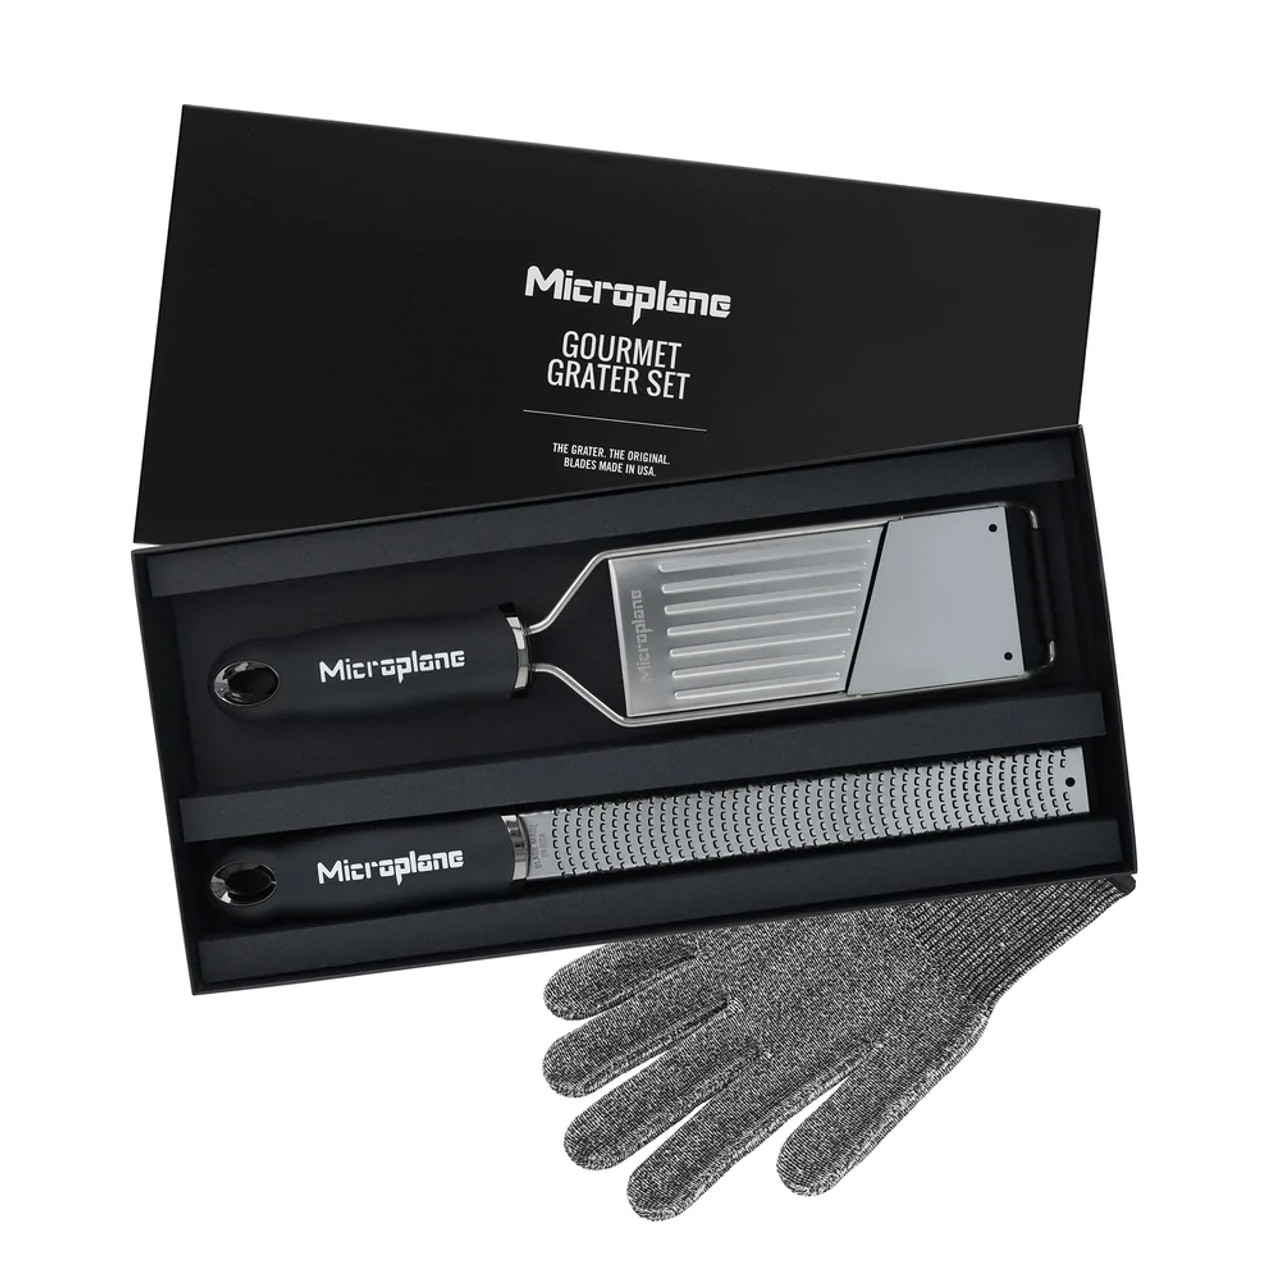 MICROPLANE - GOURMET GRATER SET WITH GLOVE